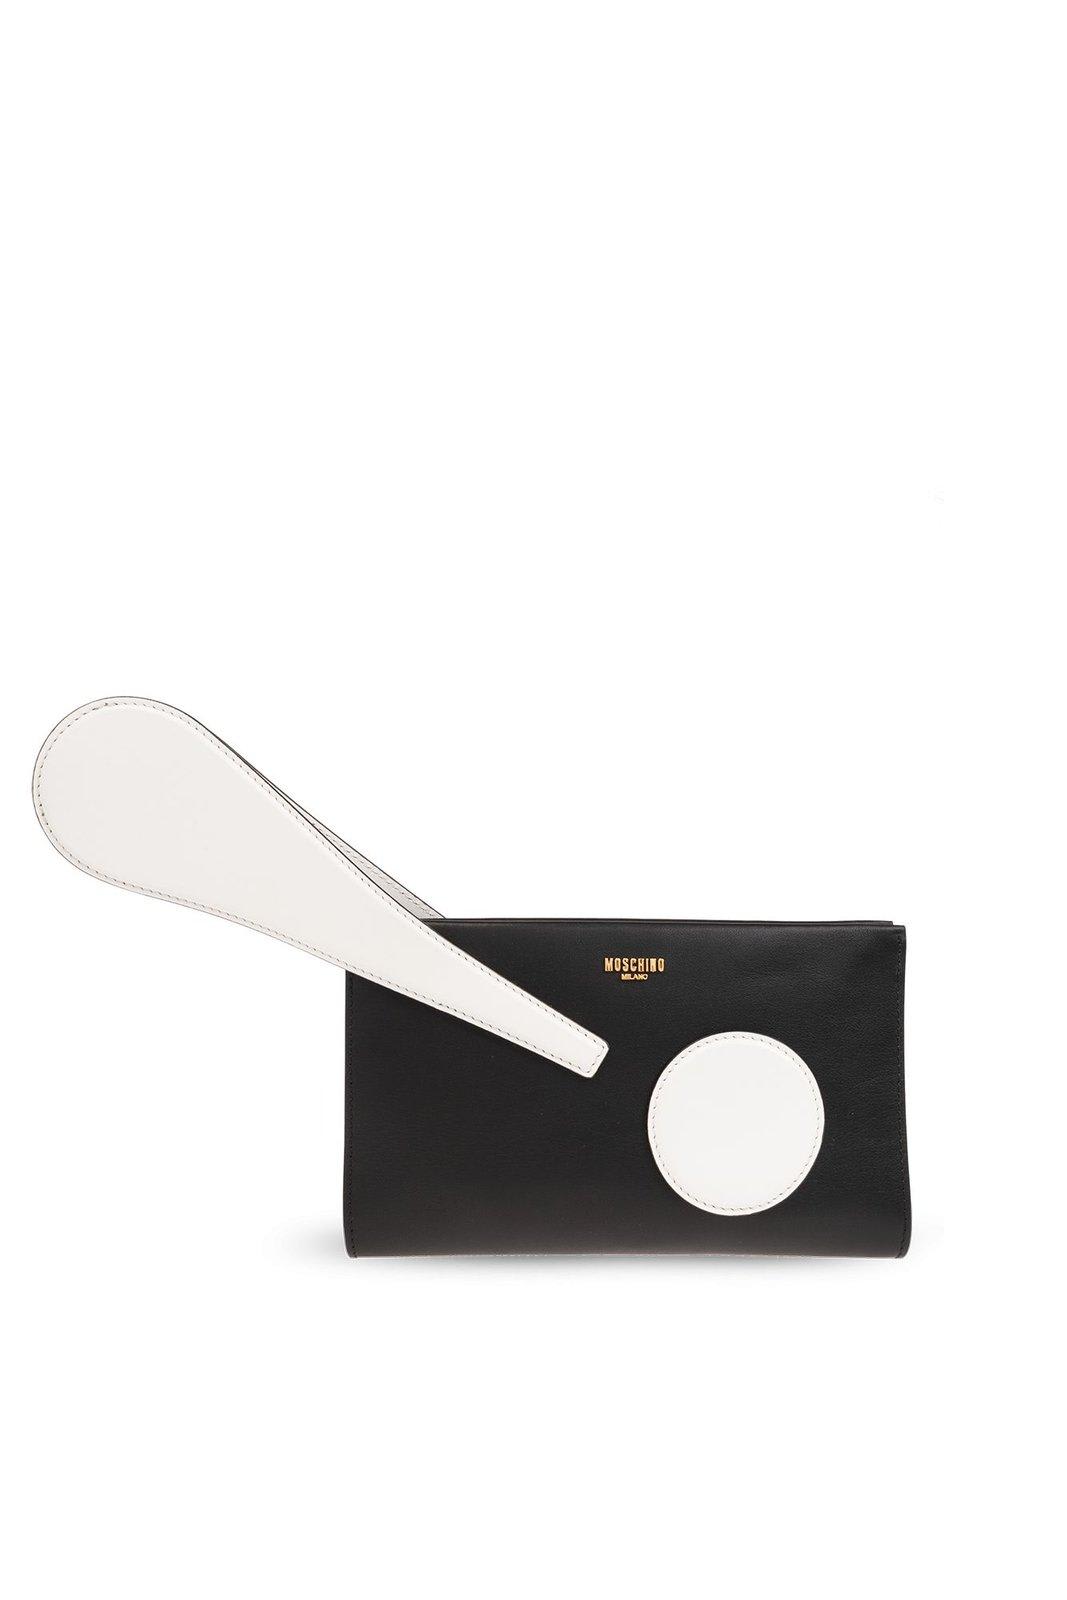 Moschino Exclamation Mark Clutch Bag In Nero